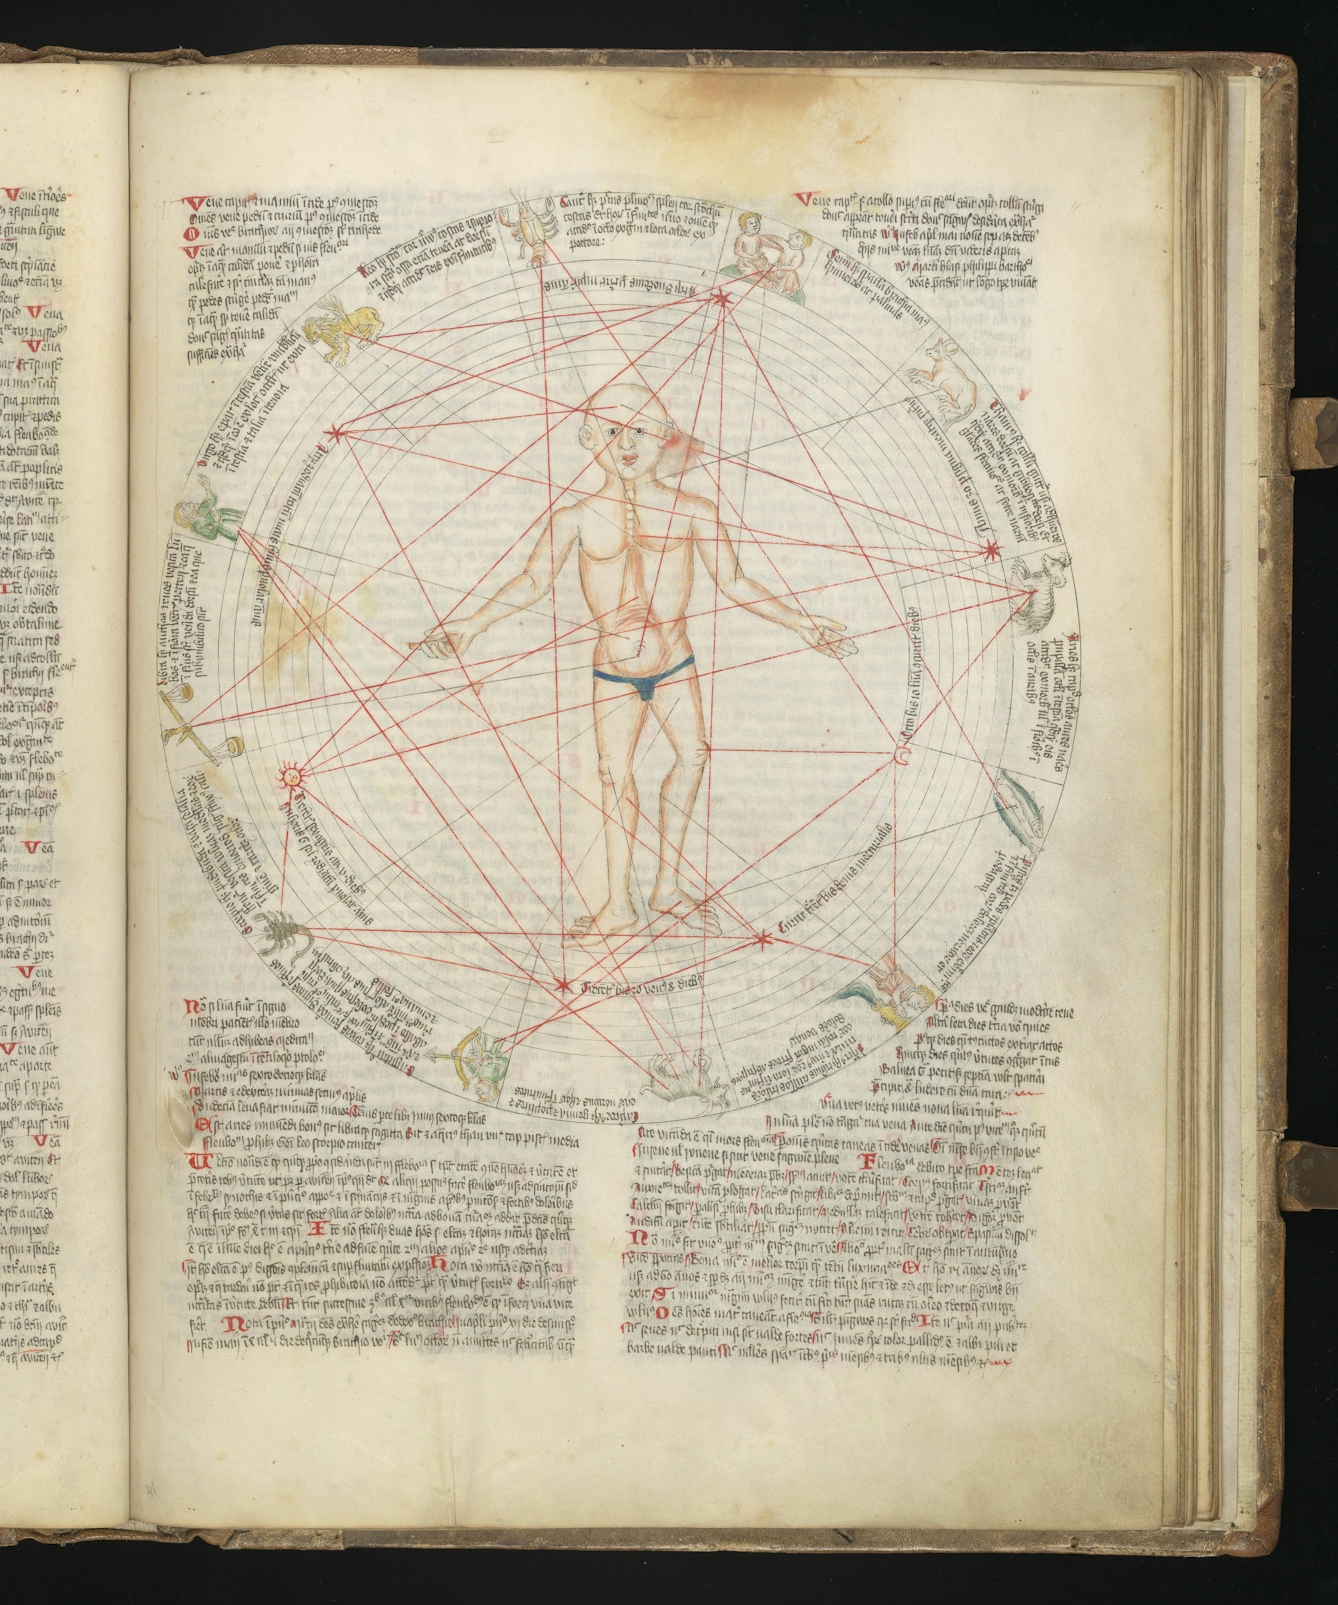 A page from a book, showing an illustration of a male human form, contained within a diagram of the zodiac, overlaid with interconnecting red lines.